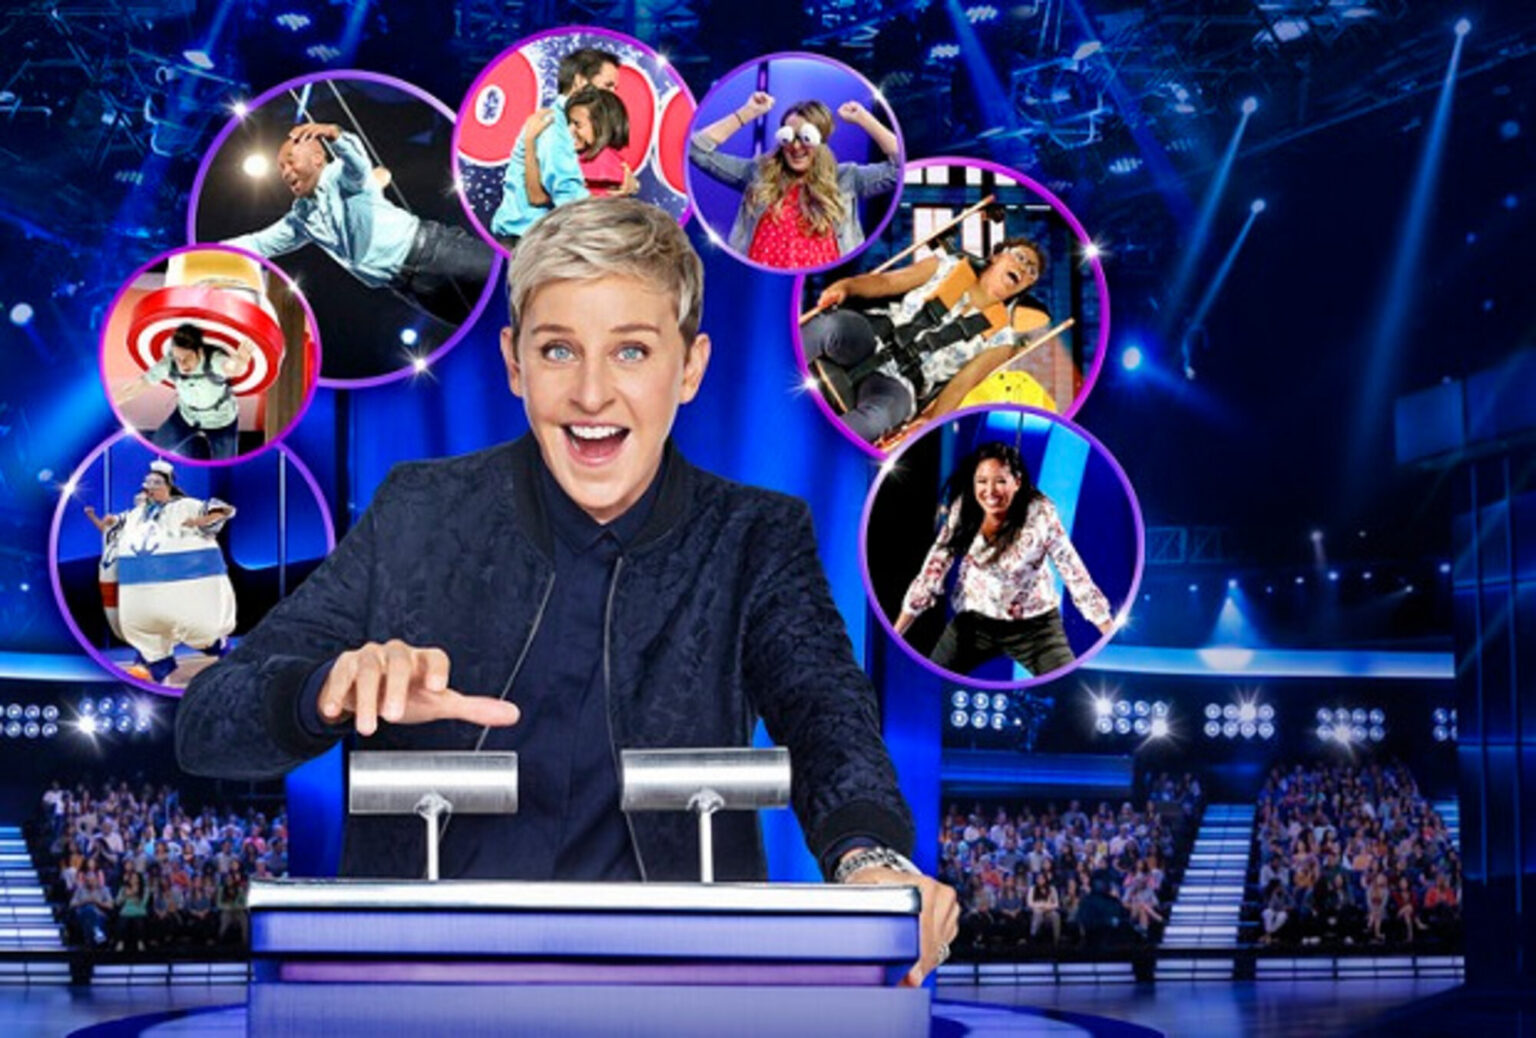 America’s former-sweetheart Ellen DeGeneres has really dug herself quite the hole. Here's what it's like to play a game on the show.